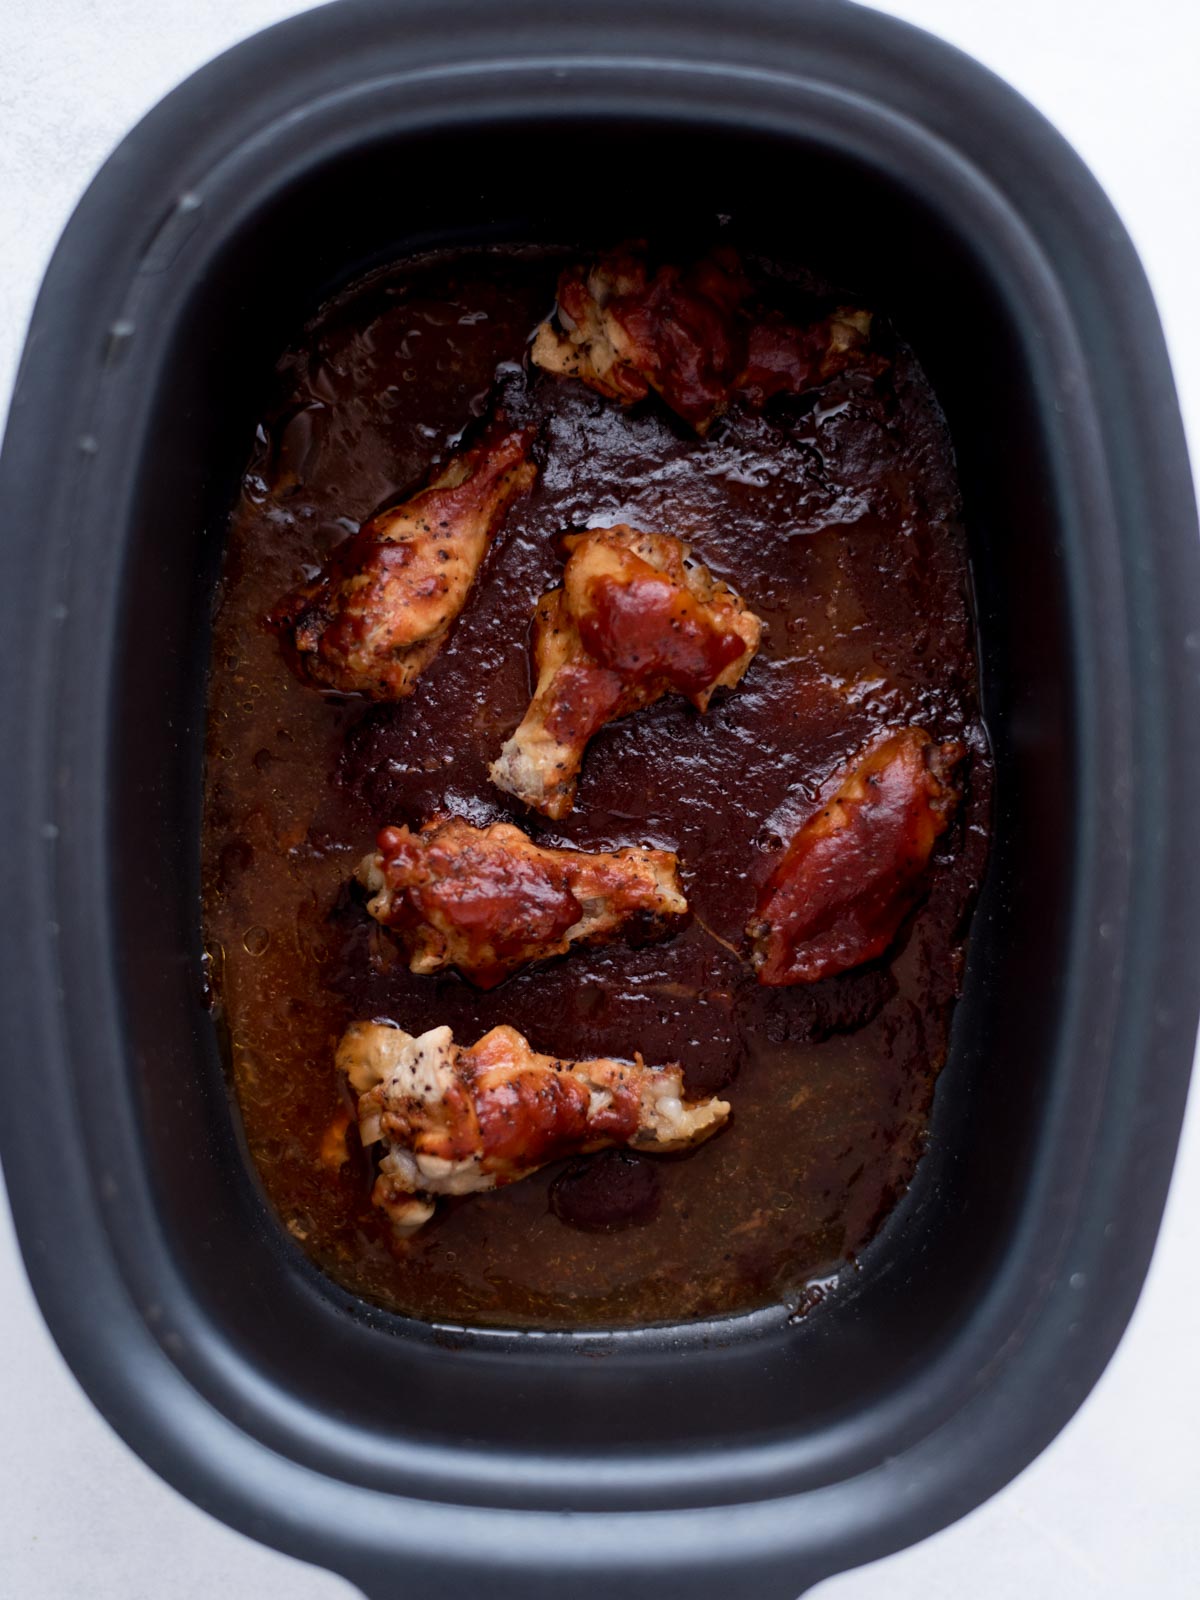 Cooked bbq chicken wings inside a crockpot.